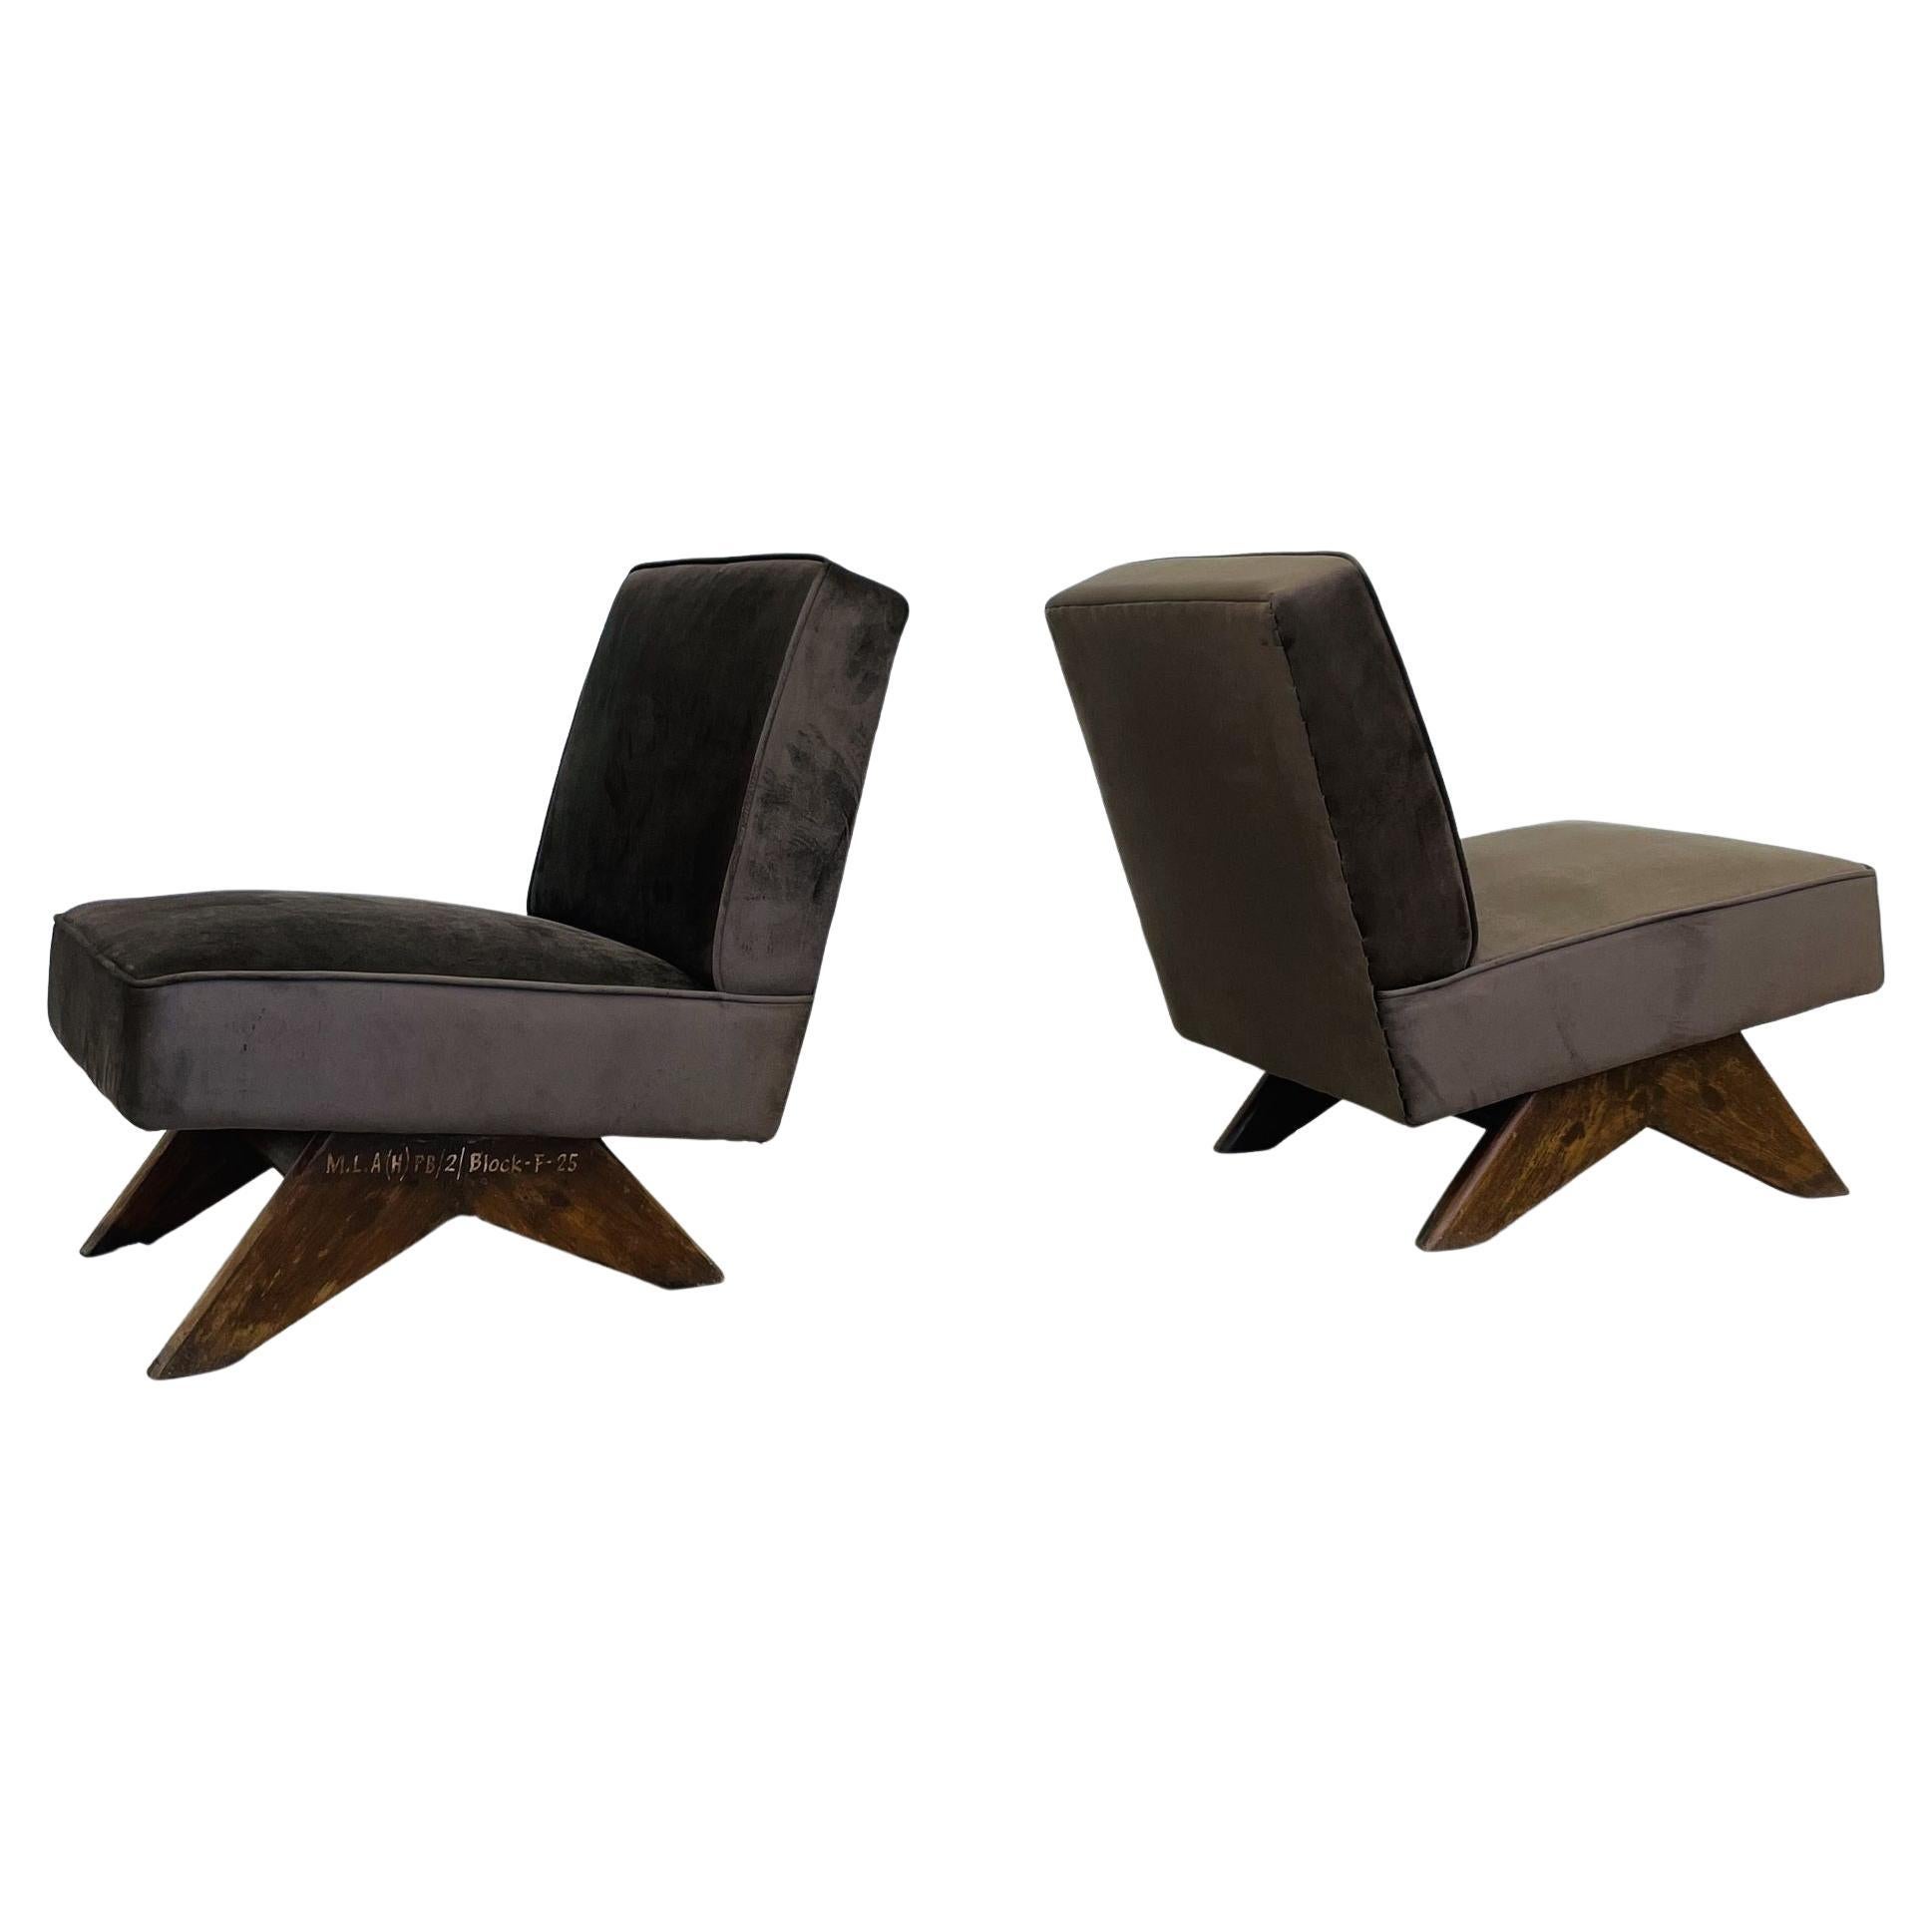 Pierre Jeanneret, French Mid-Century, Slipper Chairs, Teak, Fabric, India, 1960s